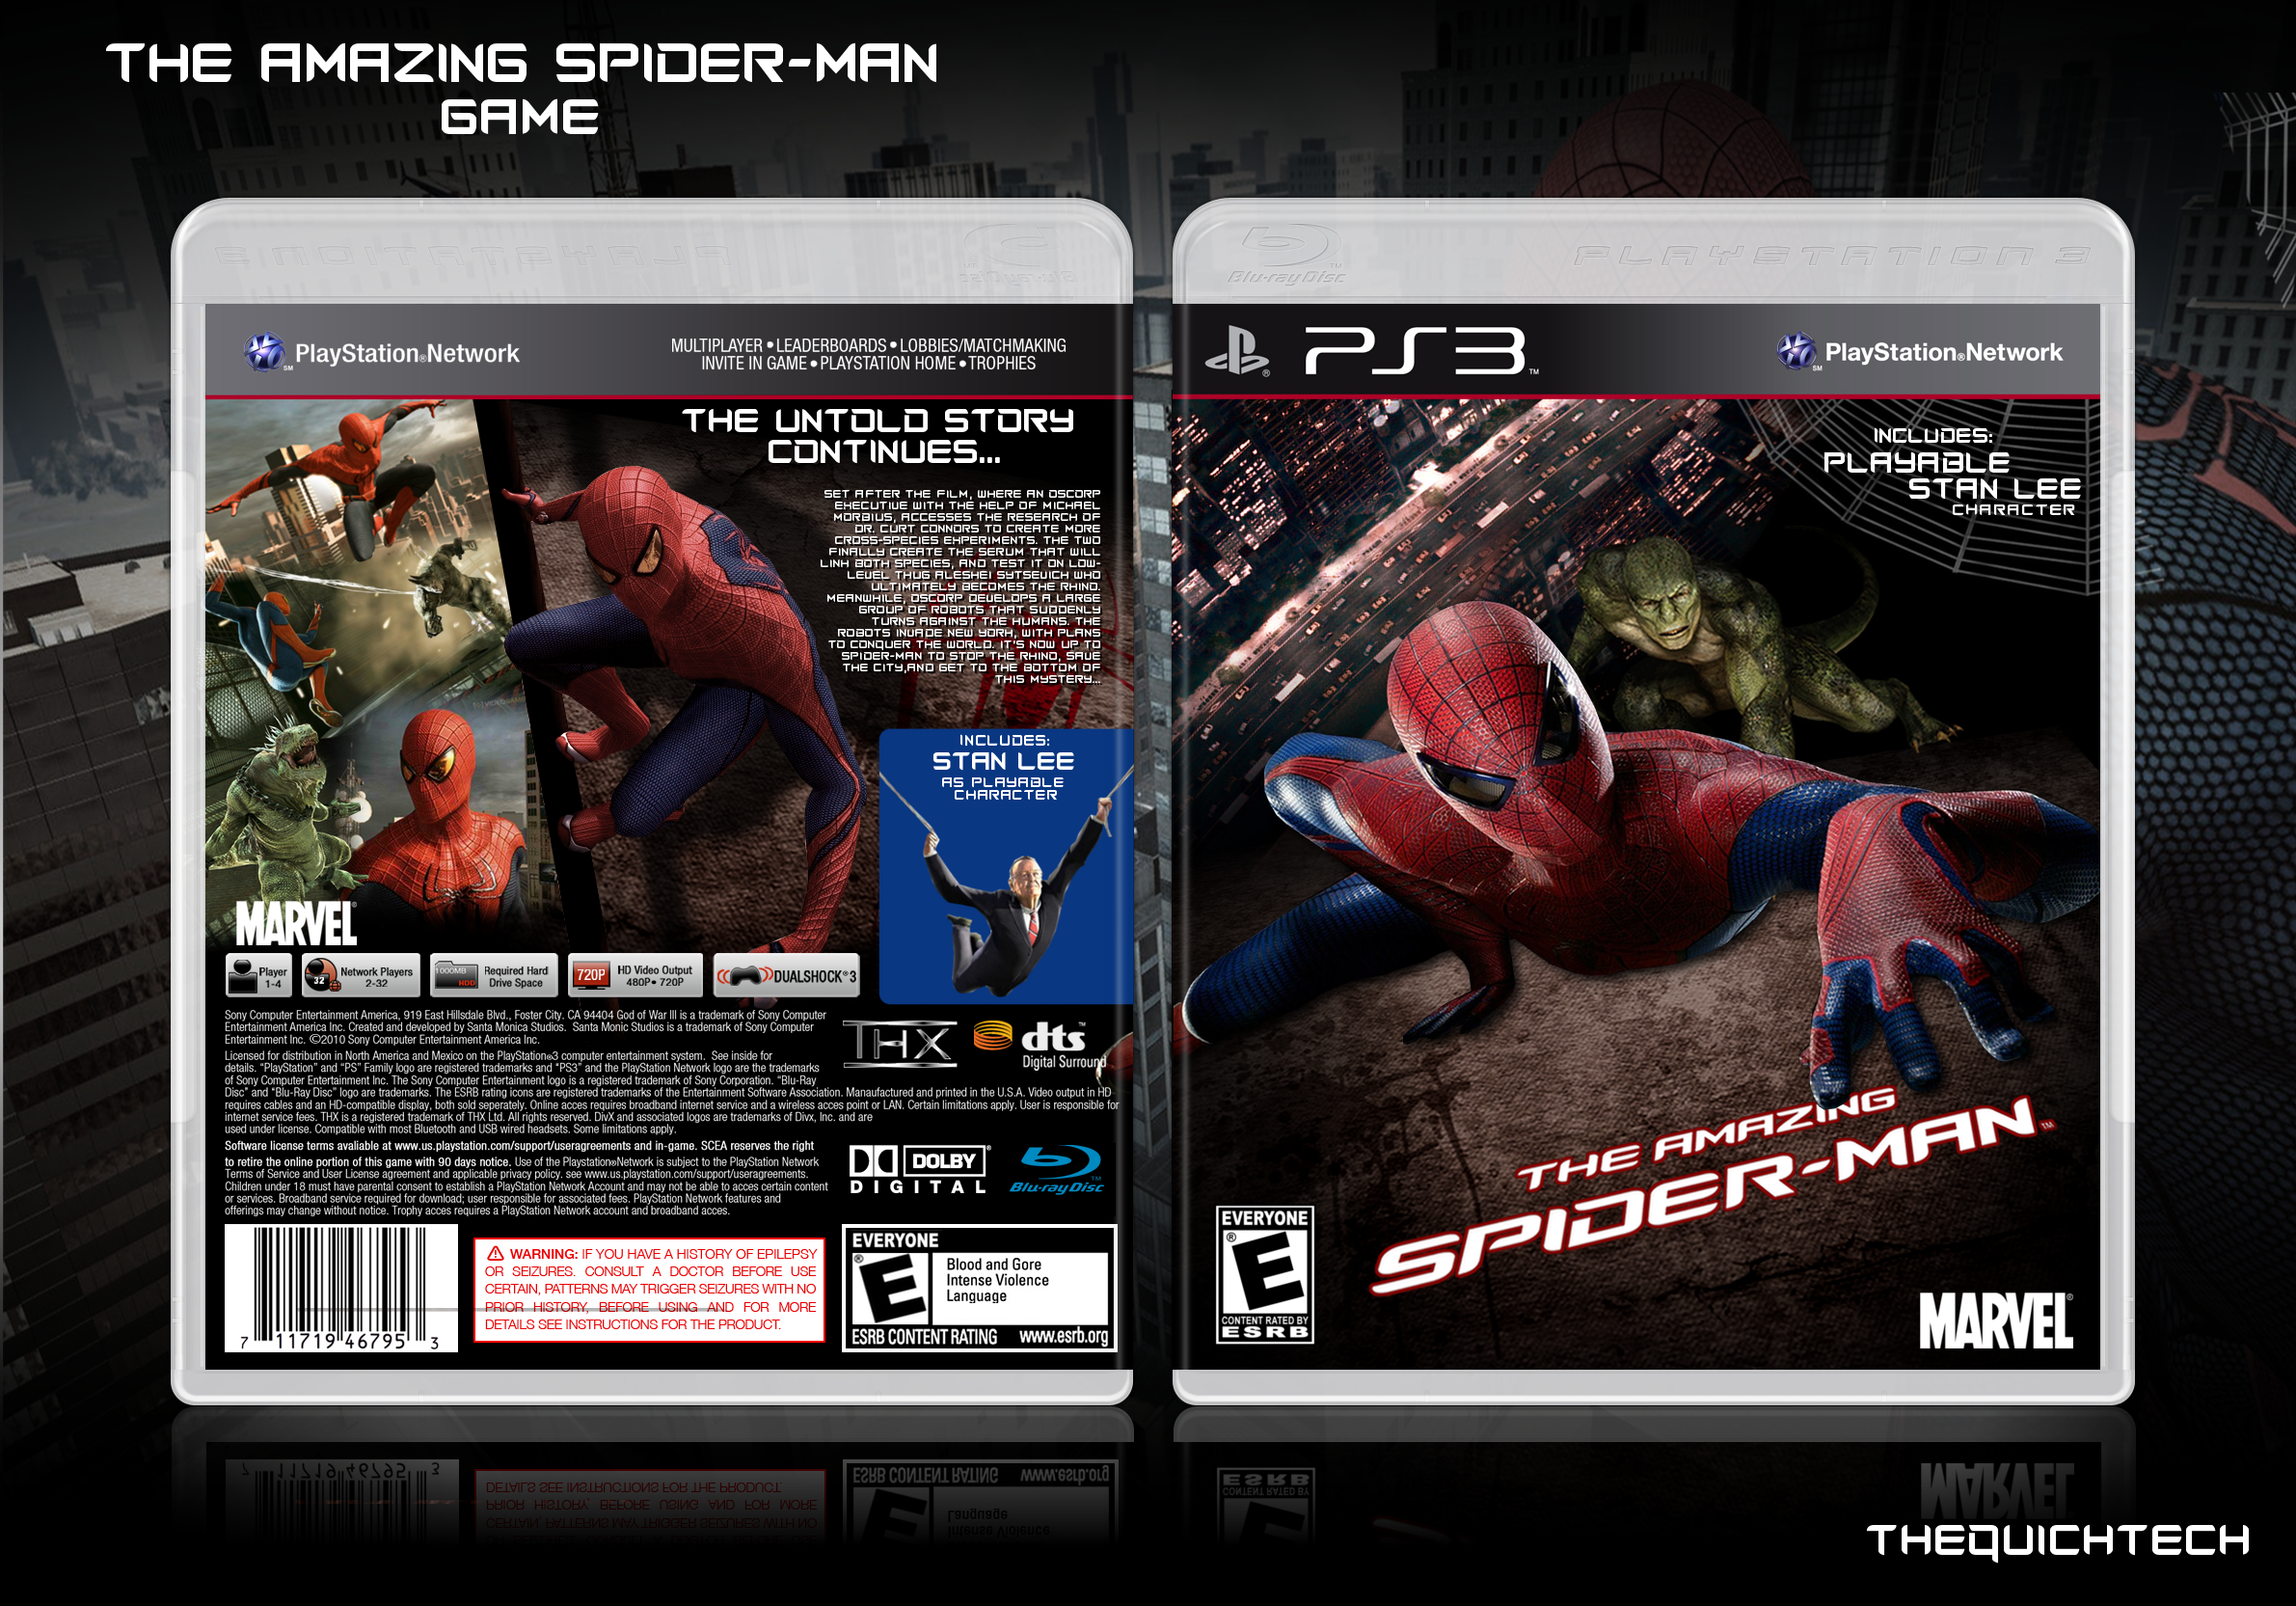 The Amazing Spider-Man: The Game box cover